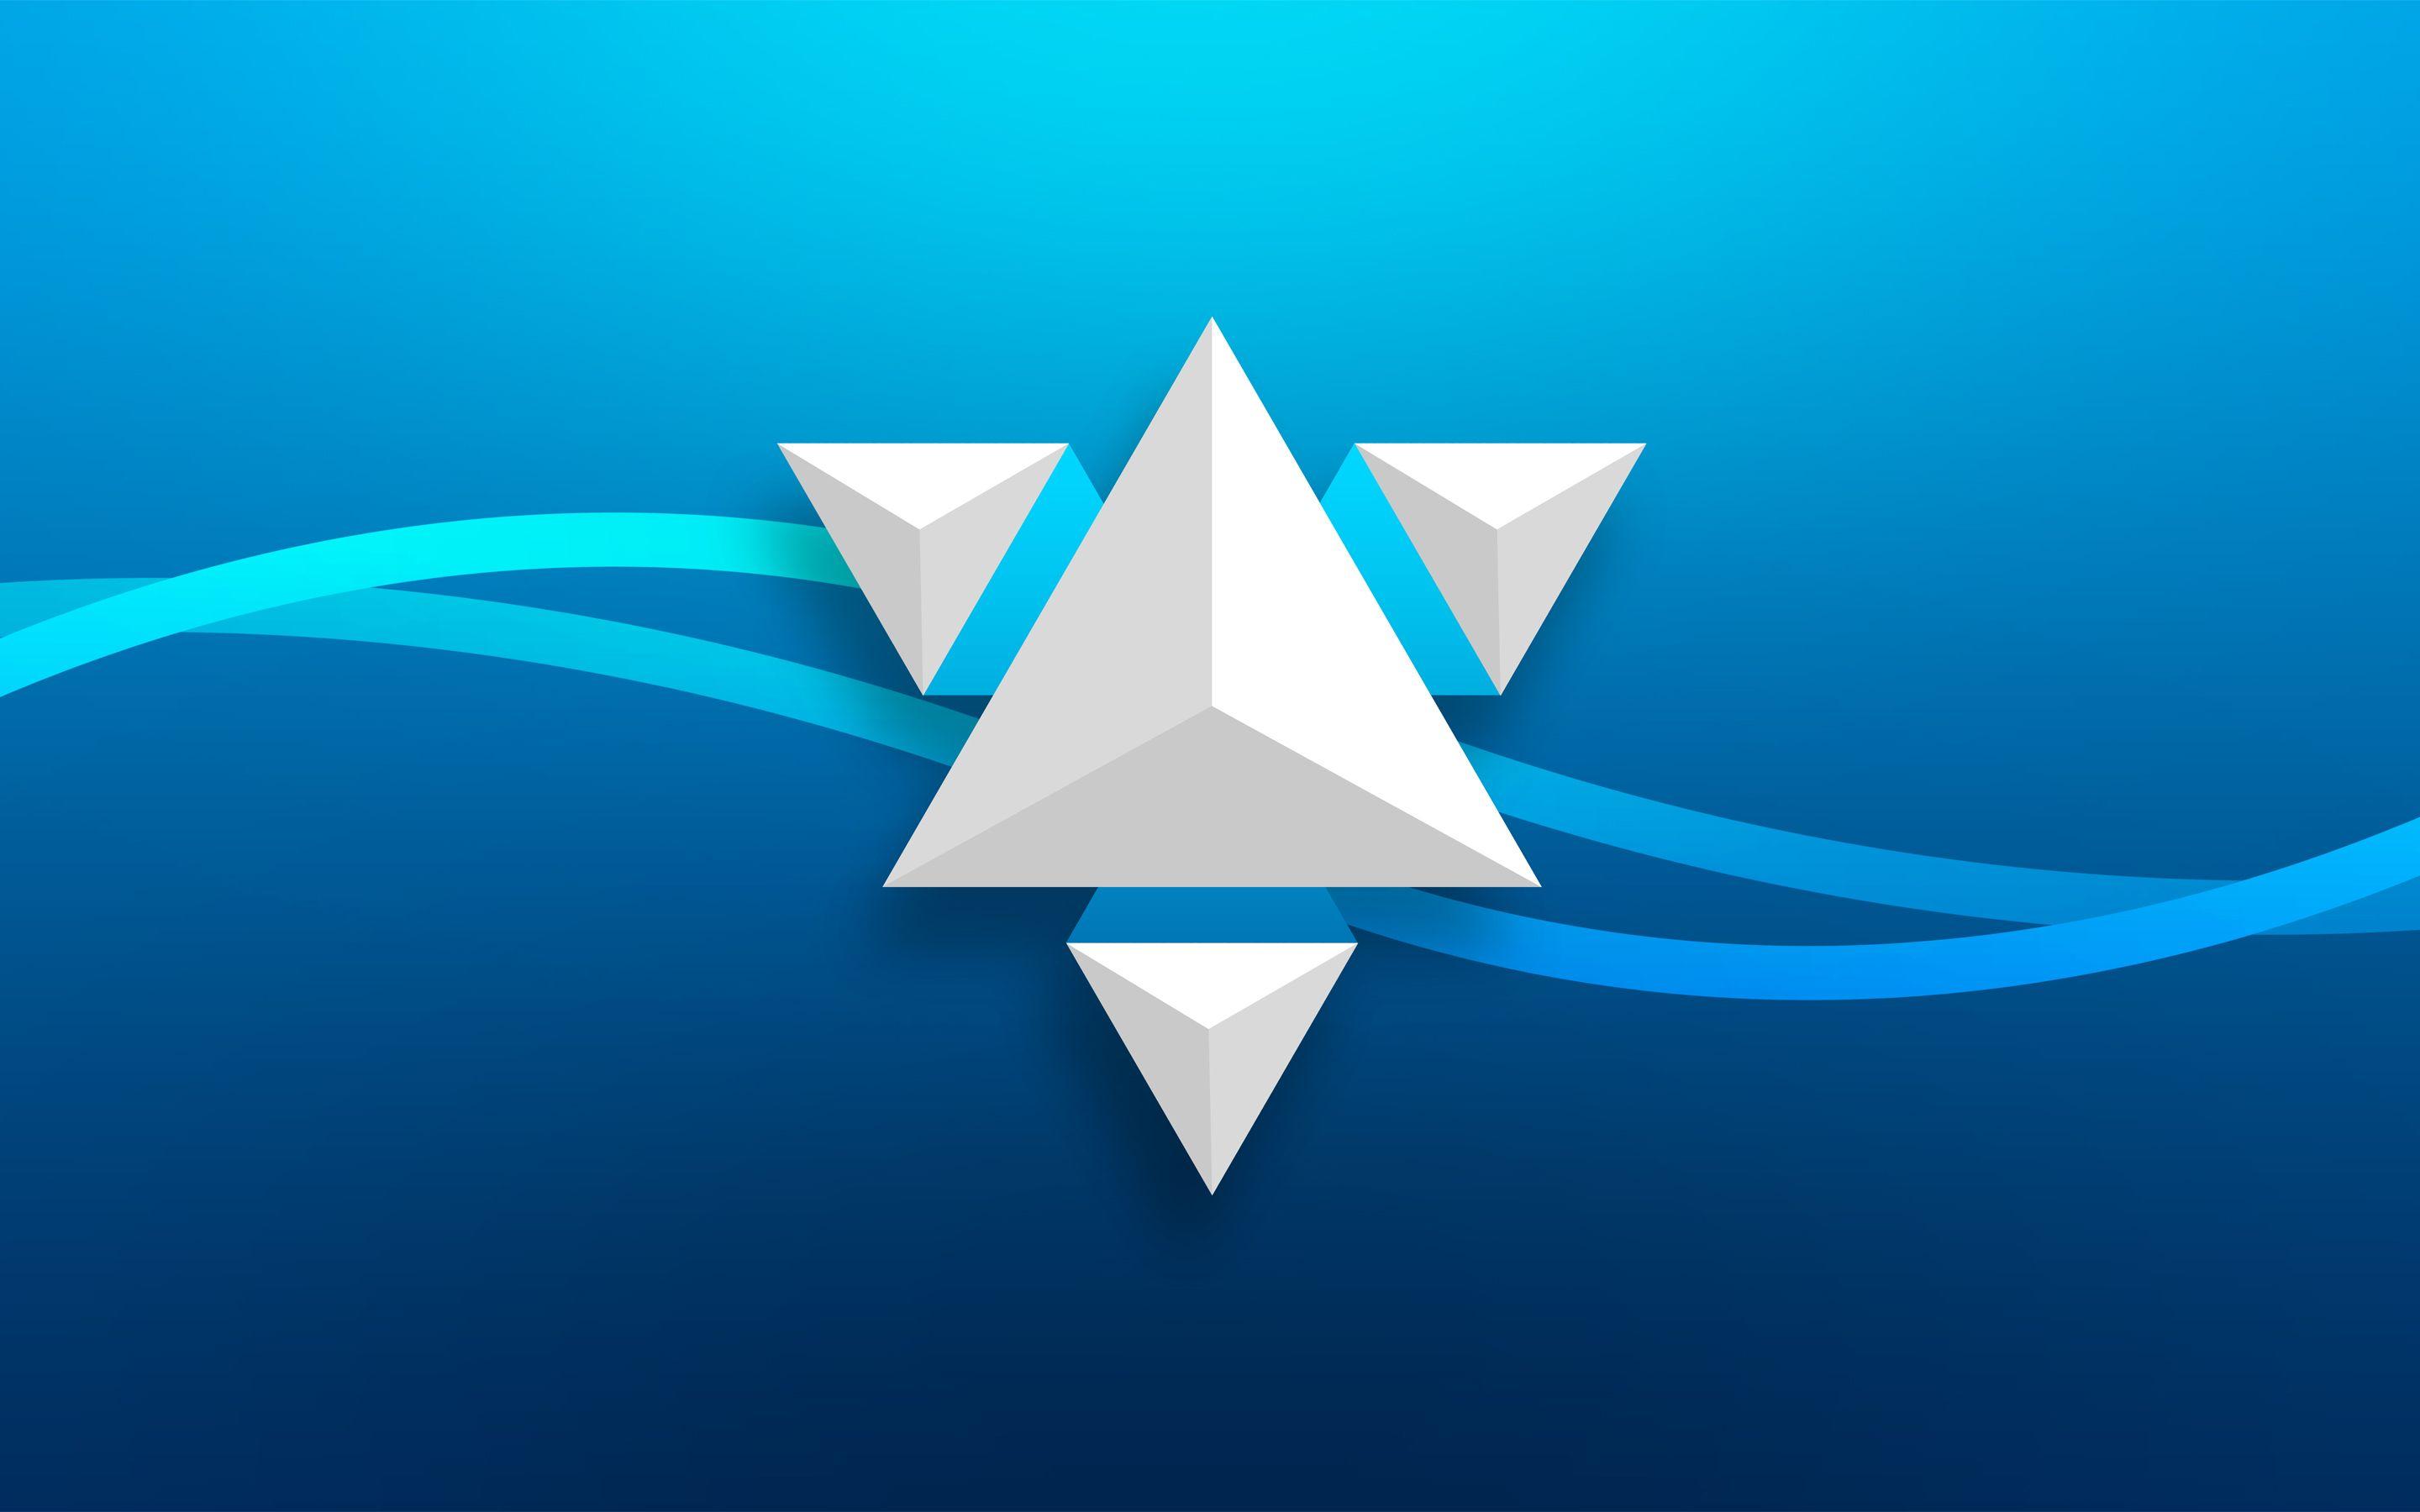 Cool Triangle Logo - Abstract 3D Triangle Abstract Wallpaper and Free